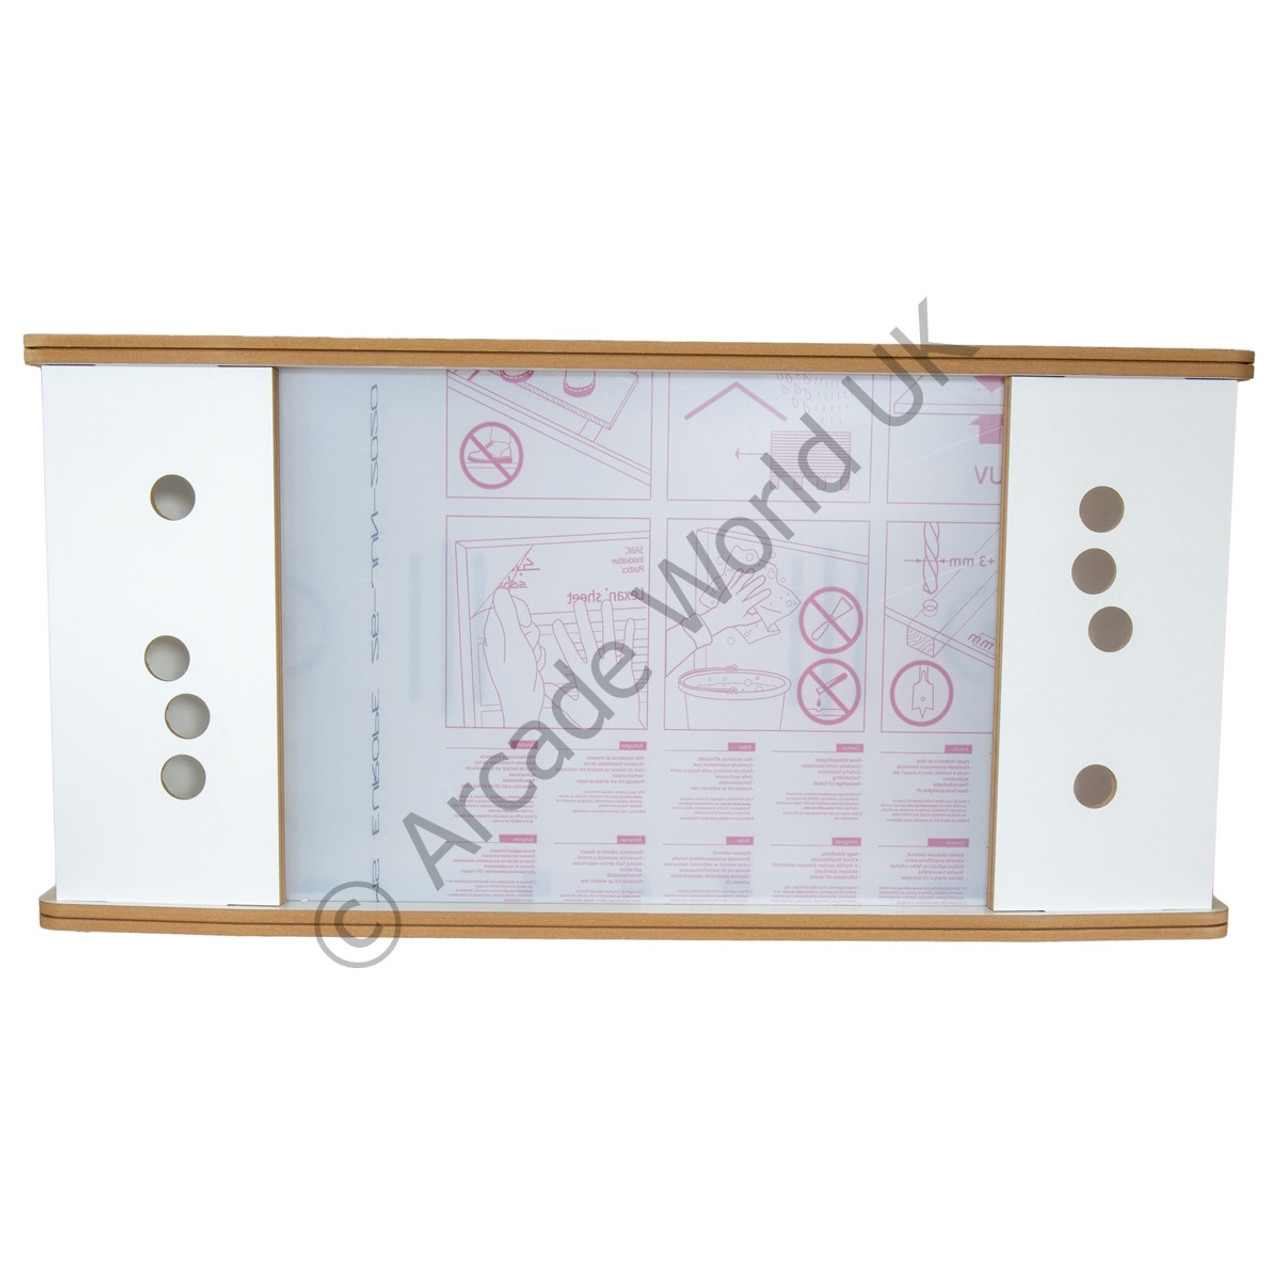 2 Player Table Top Cocktail Arcade Cabinet Kit - White